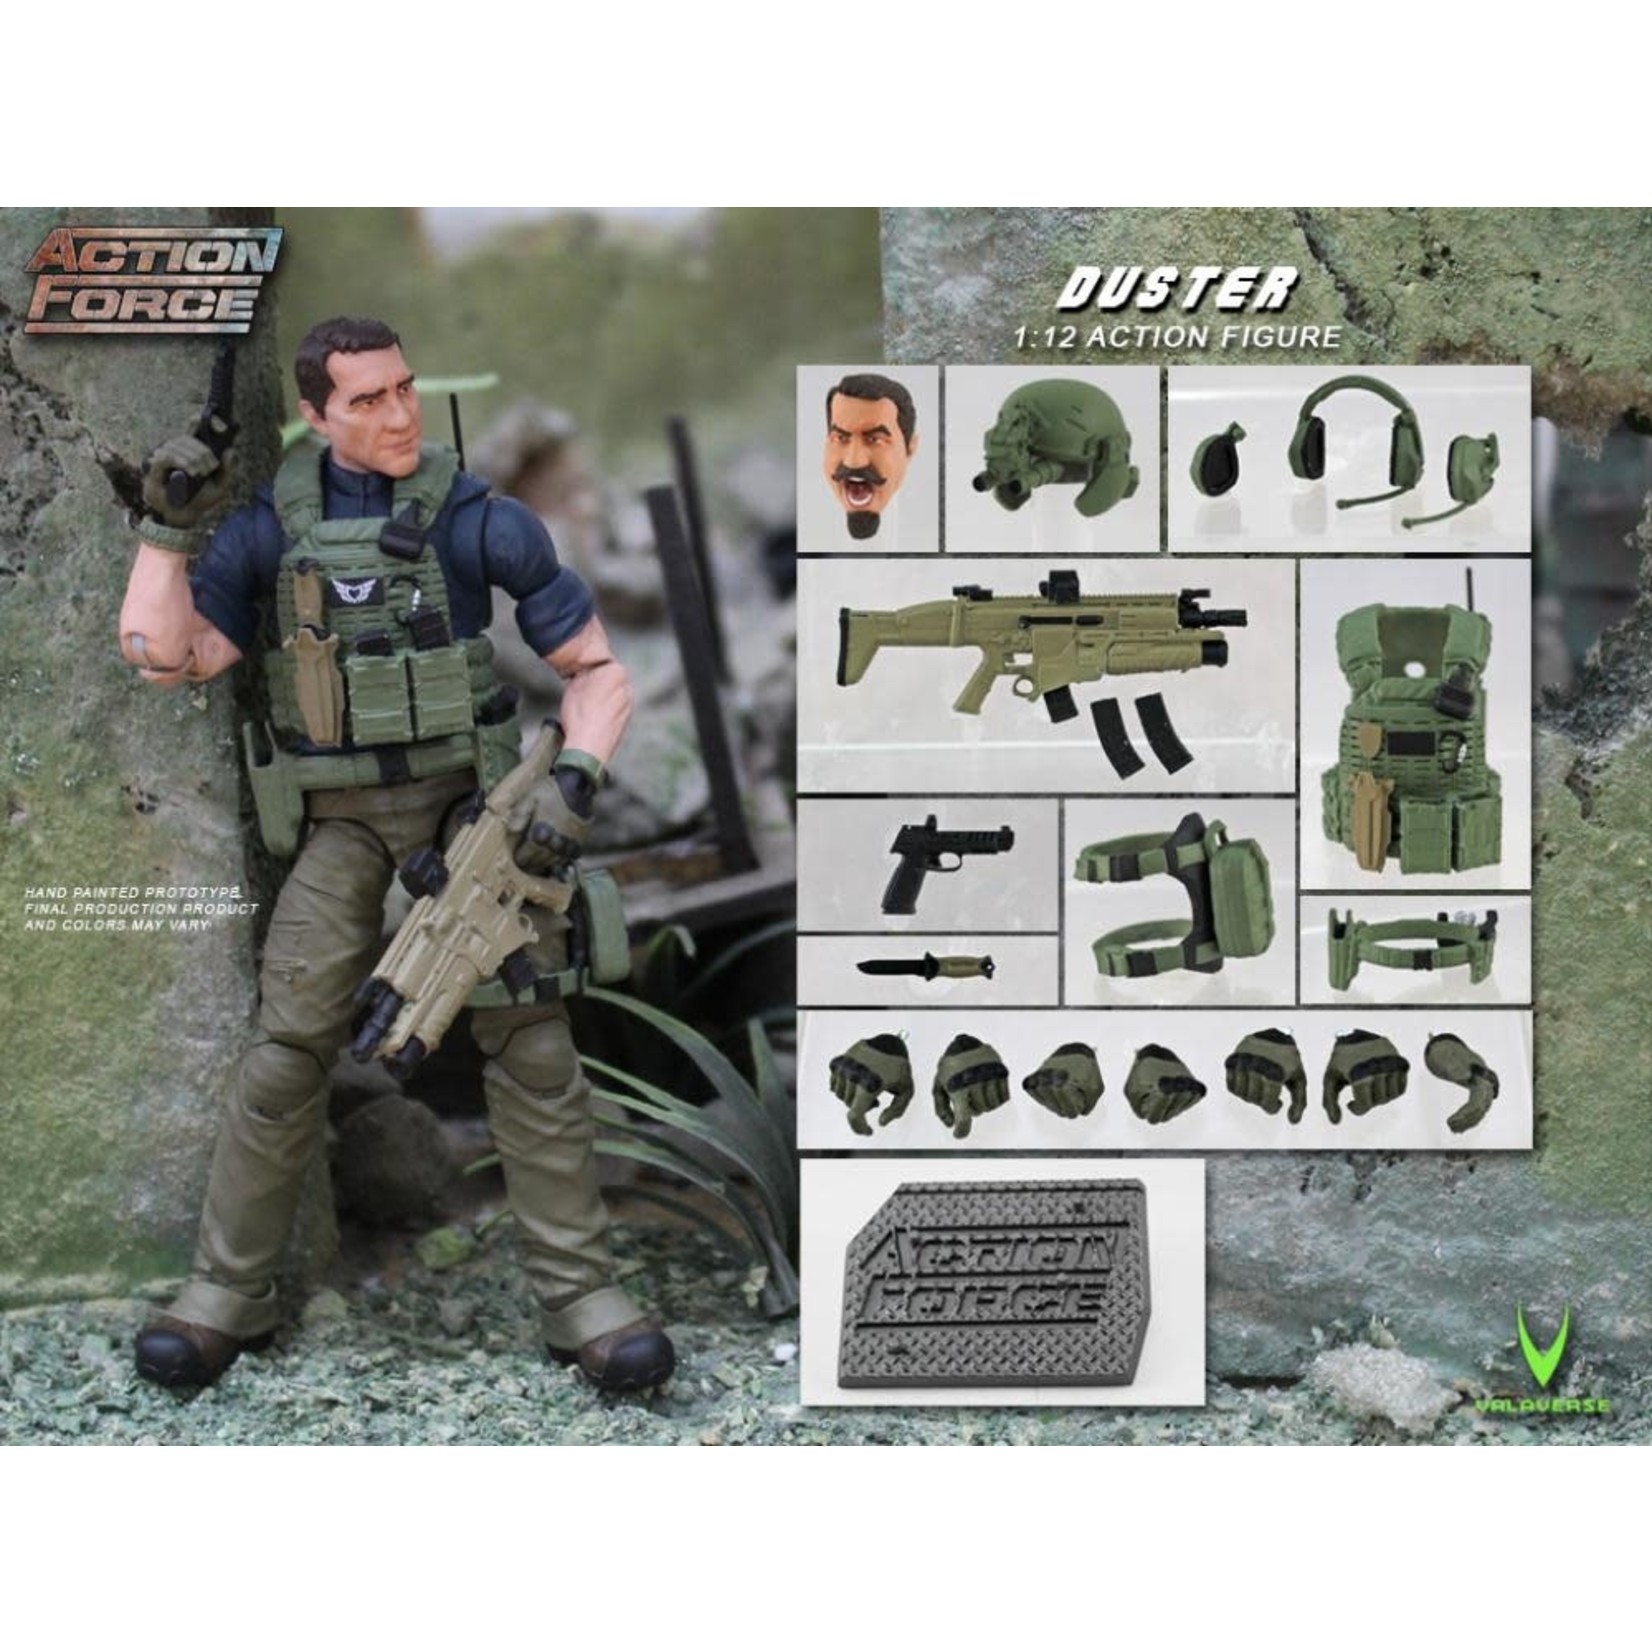 Valaverse Valaverse Action Force Duster (Tim Kennedy) 1/12 Scale Action Figure